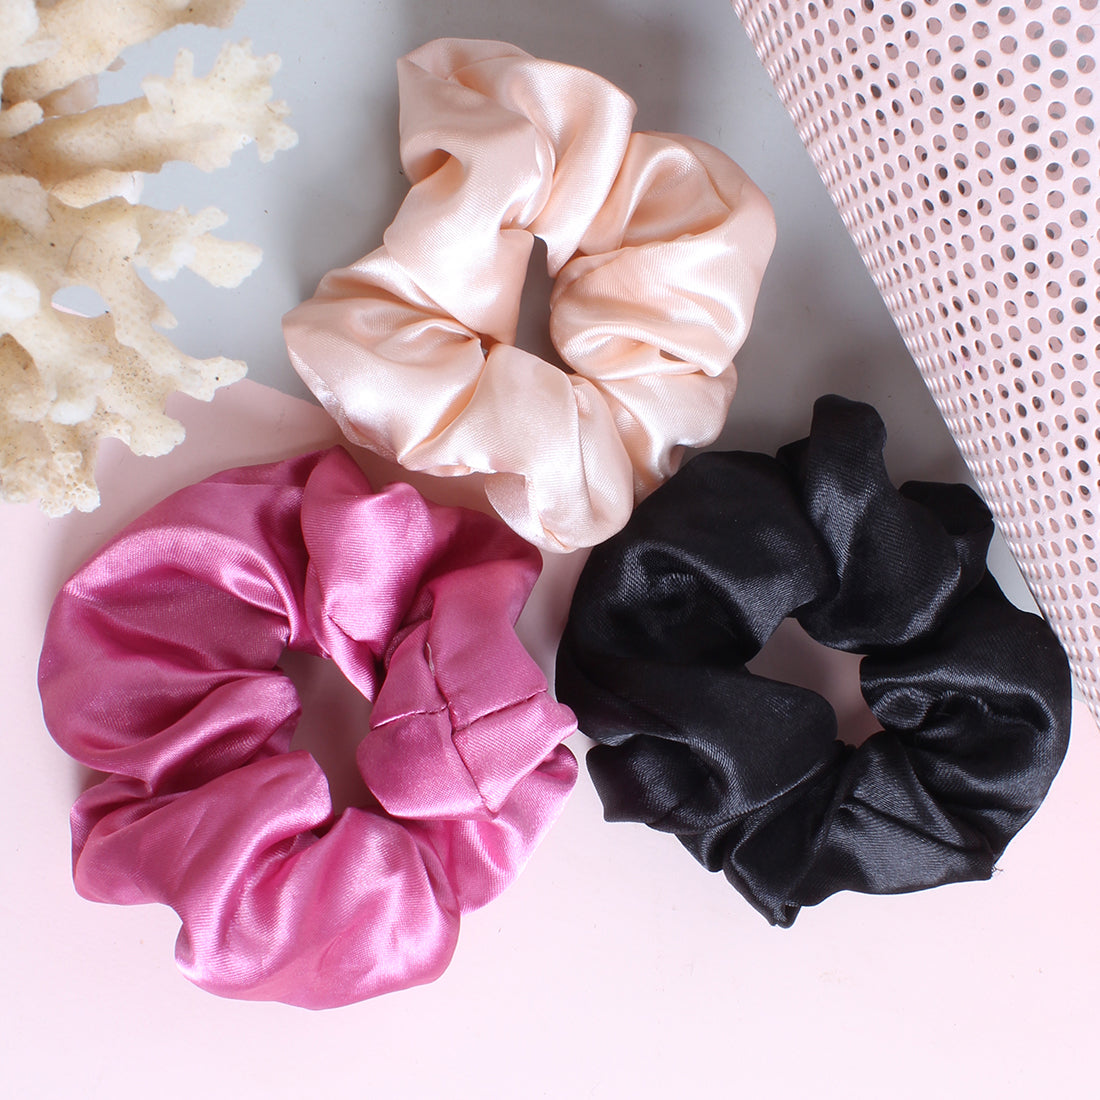 19 Clever Uses for Your Old Hair Ties and Scrunchies